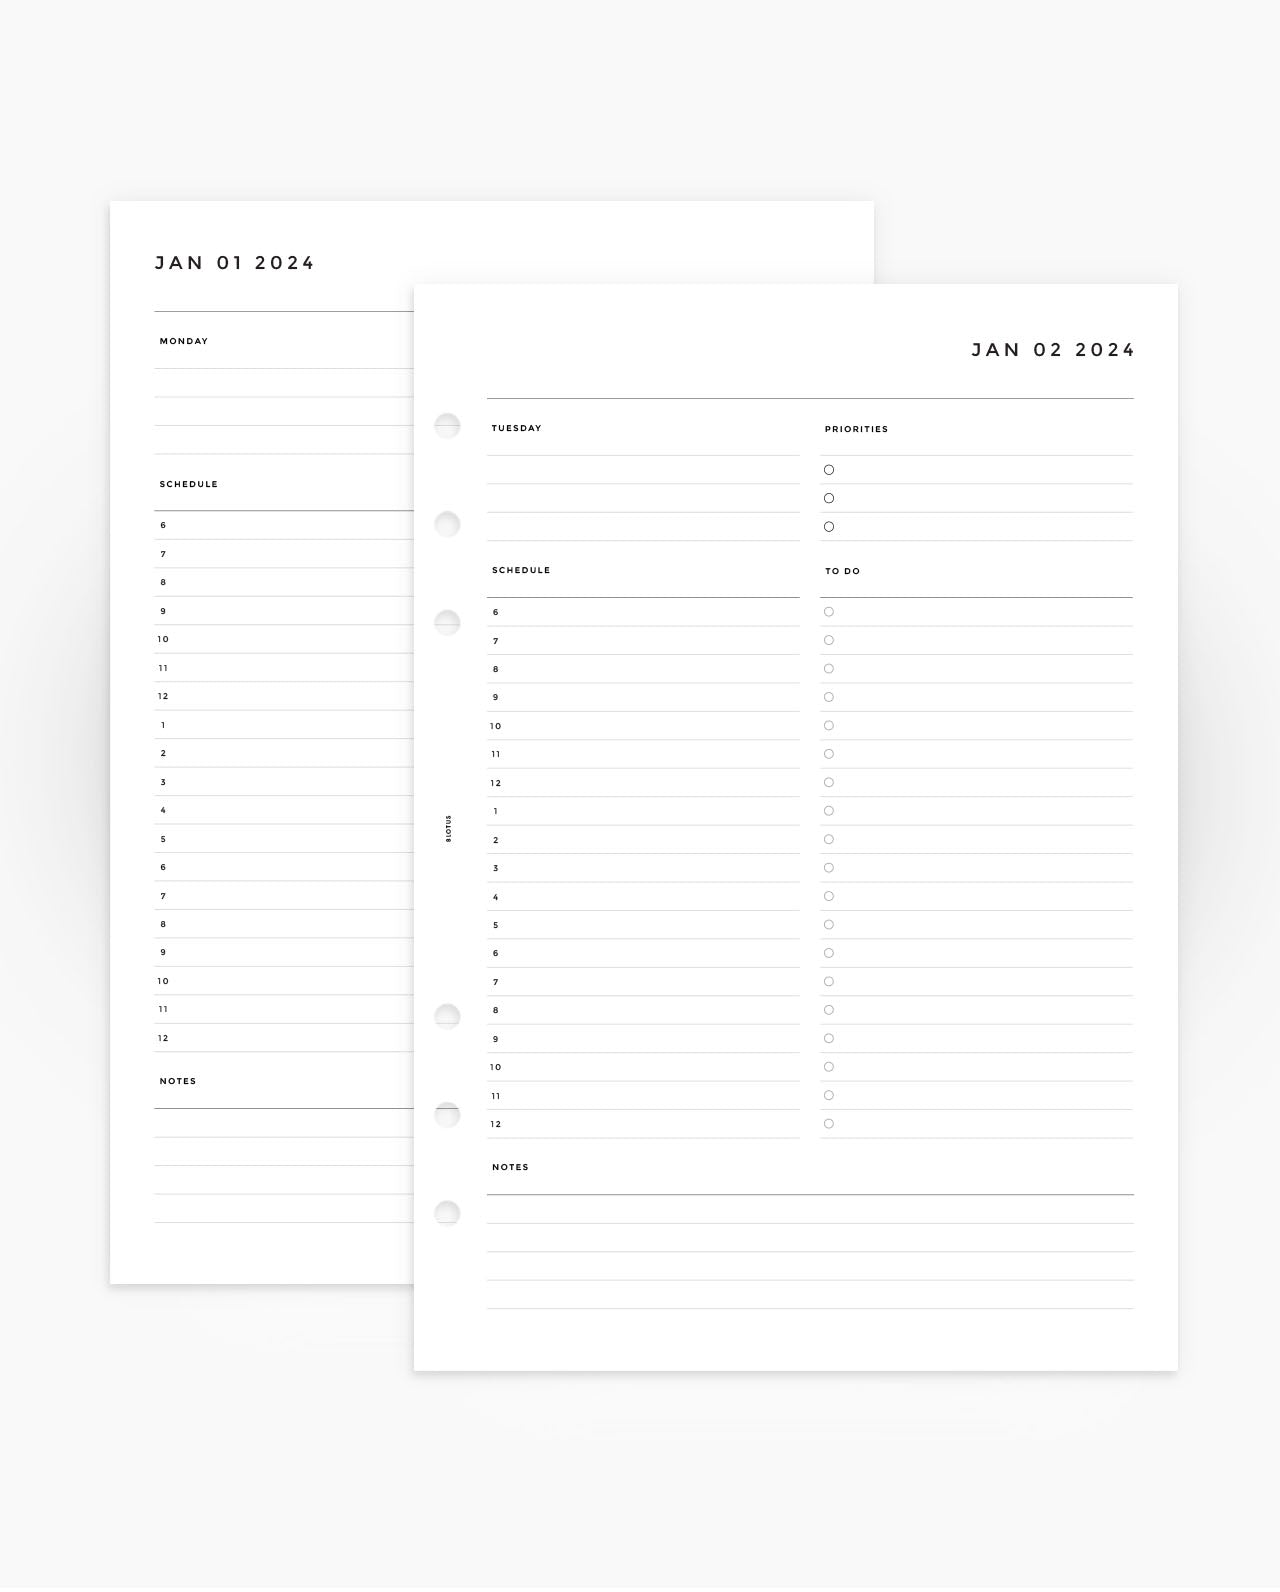 MN203 - 2024 DAILY PLANNER - HOURLY - DO1P - Printable PDF